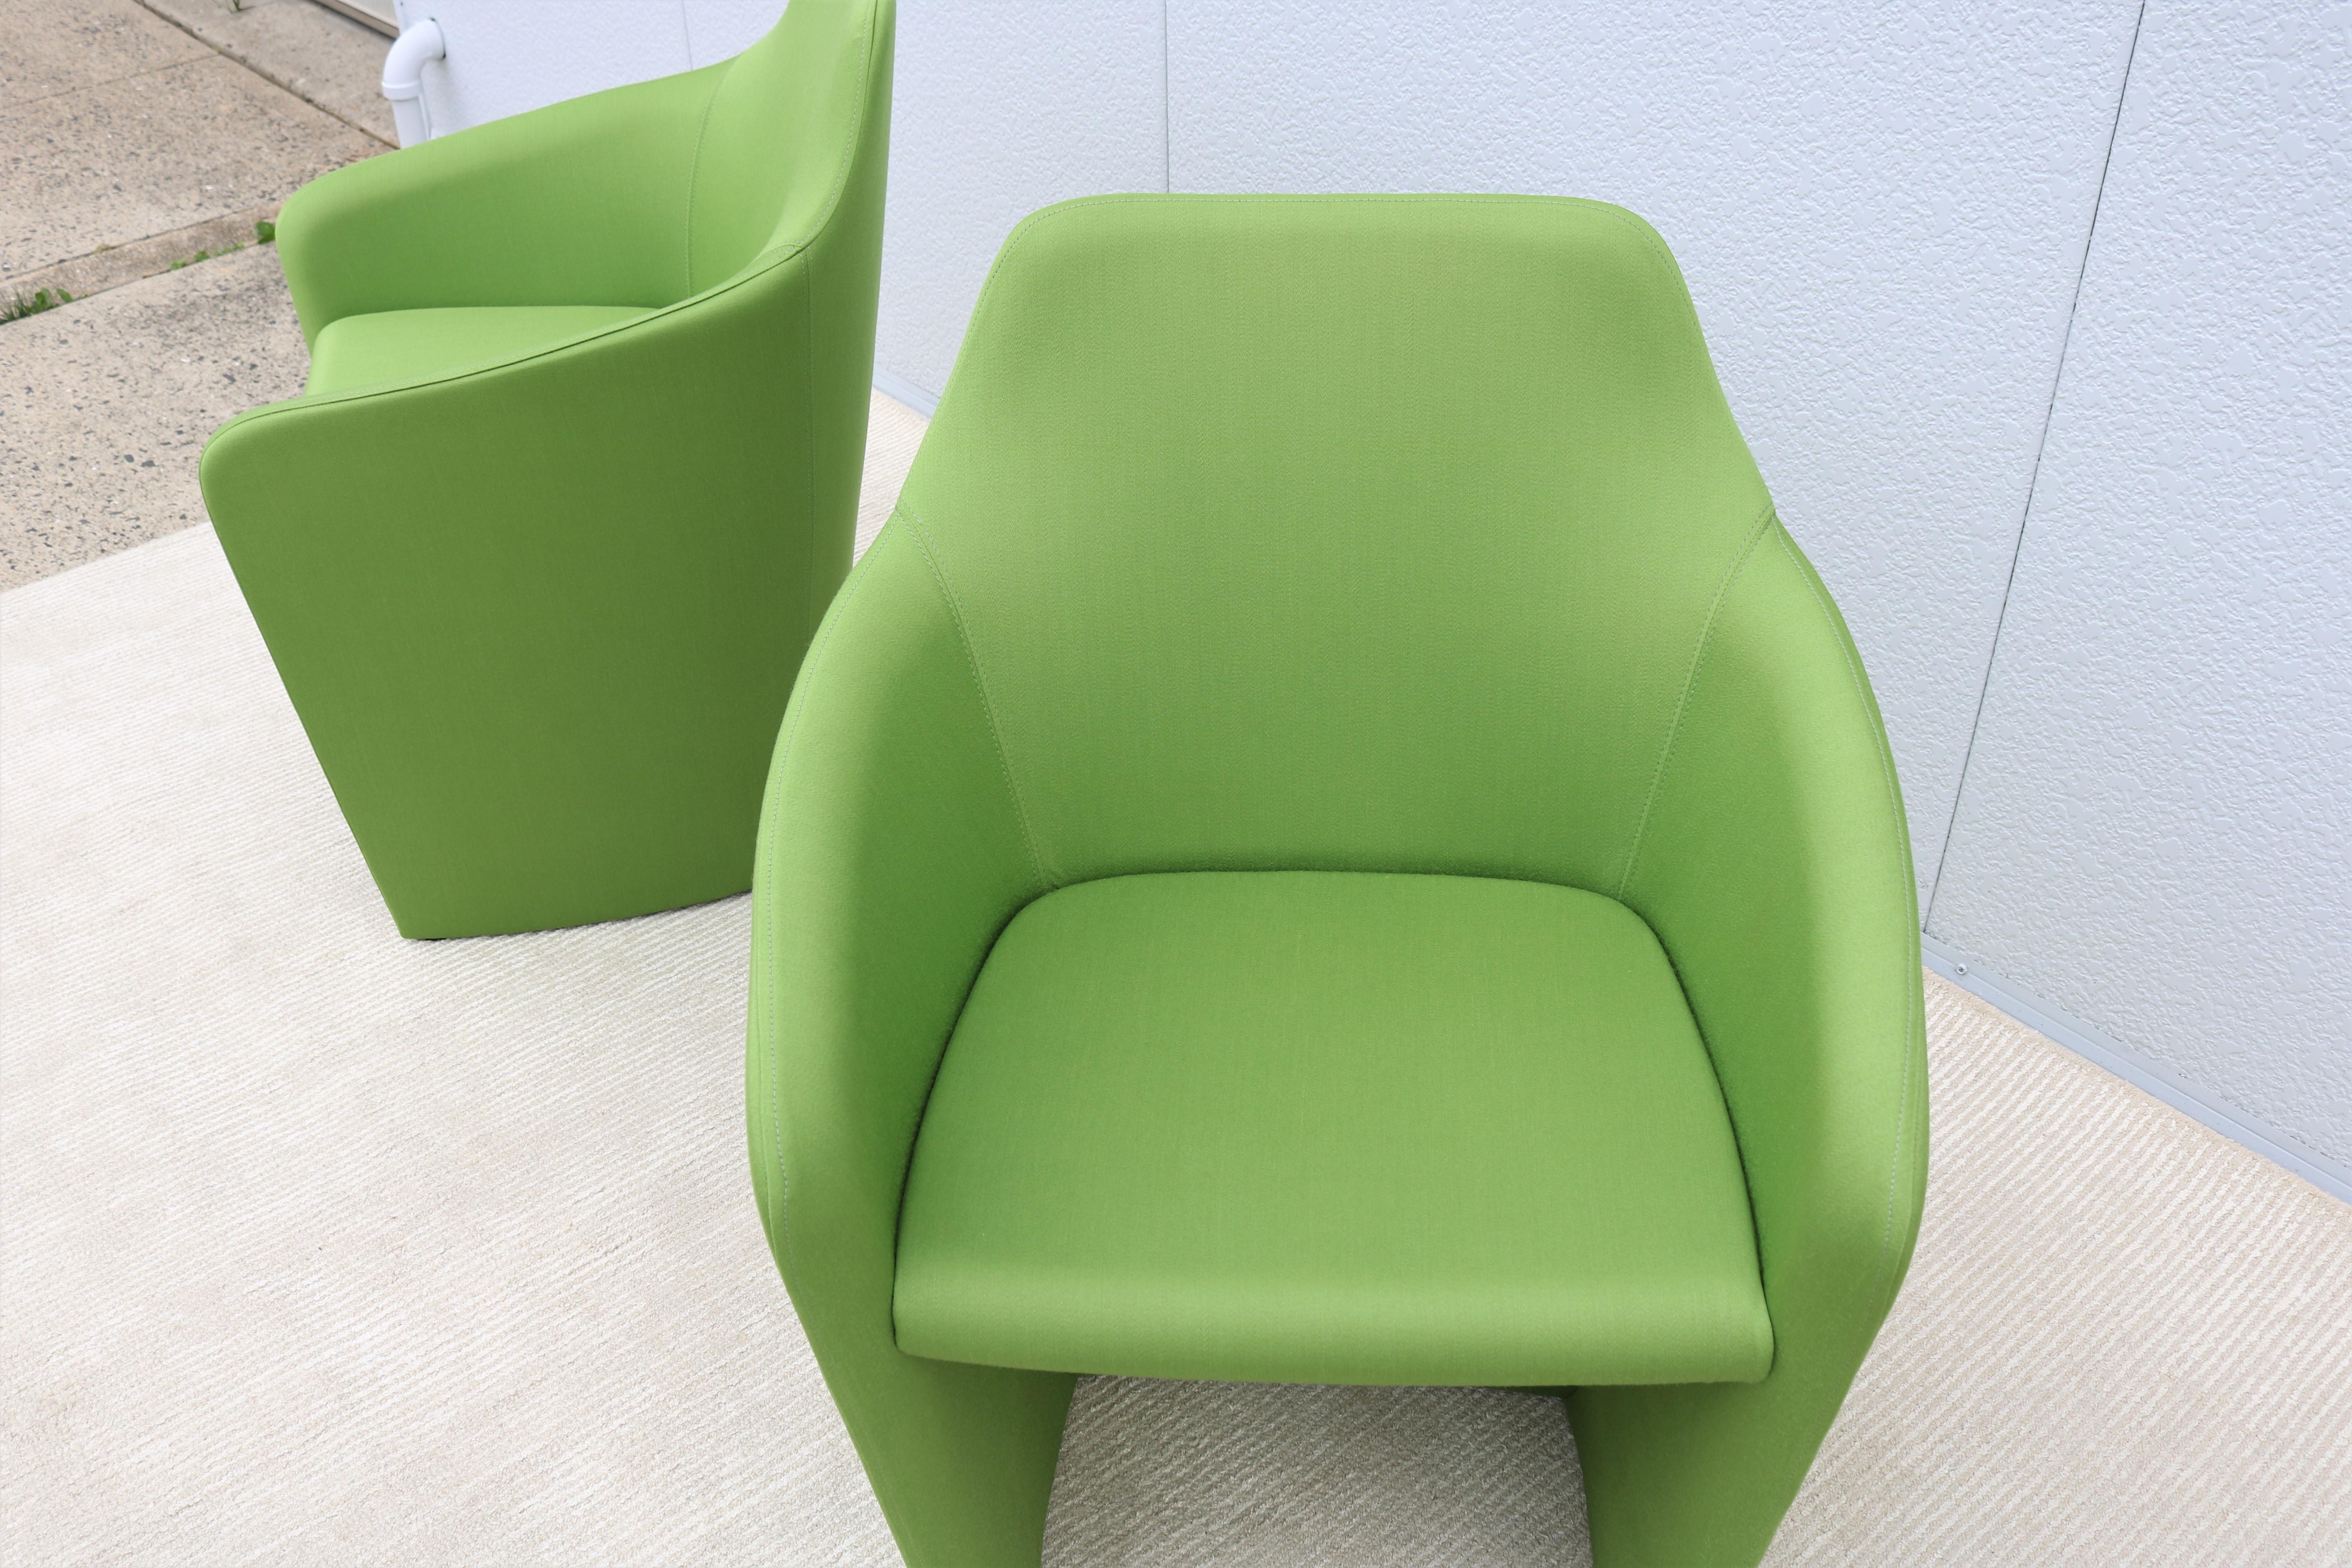 Molded Contemporary Modern Simon Pengelly for Allermuir Venus Green Tub Chairs, a Pair For Sale